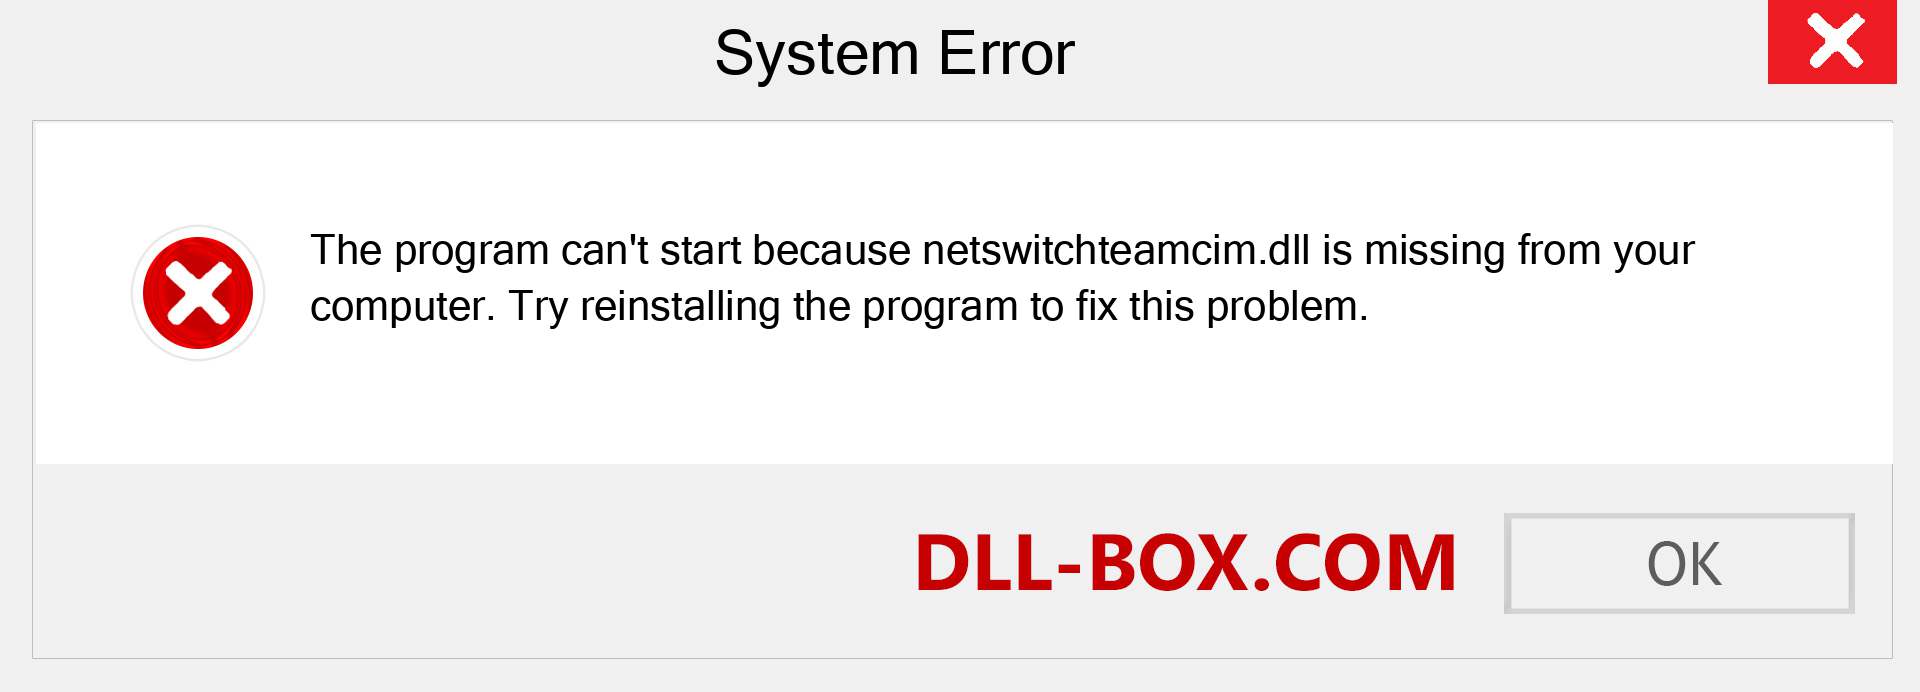  netswitchteamcim.dll file is missing?. Download for Windows 7, 8, 10 - Fix  netswitchteamcim dll Missing Error on Windows, photos, images